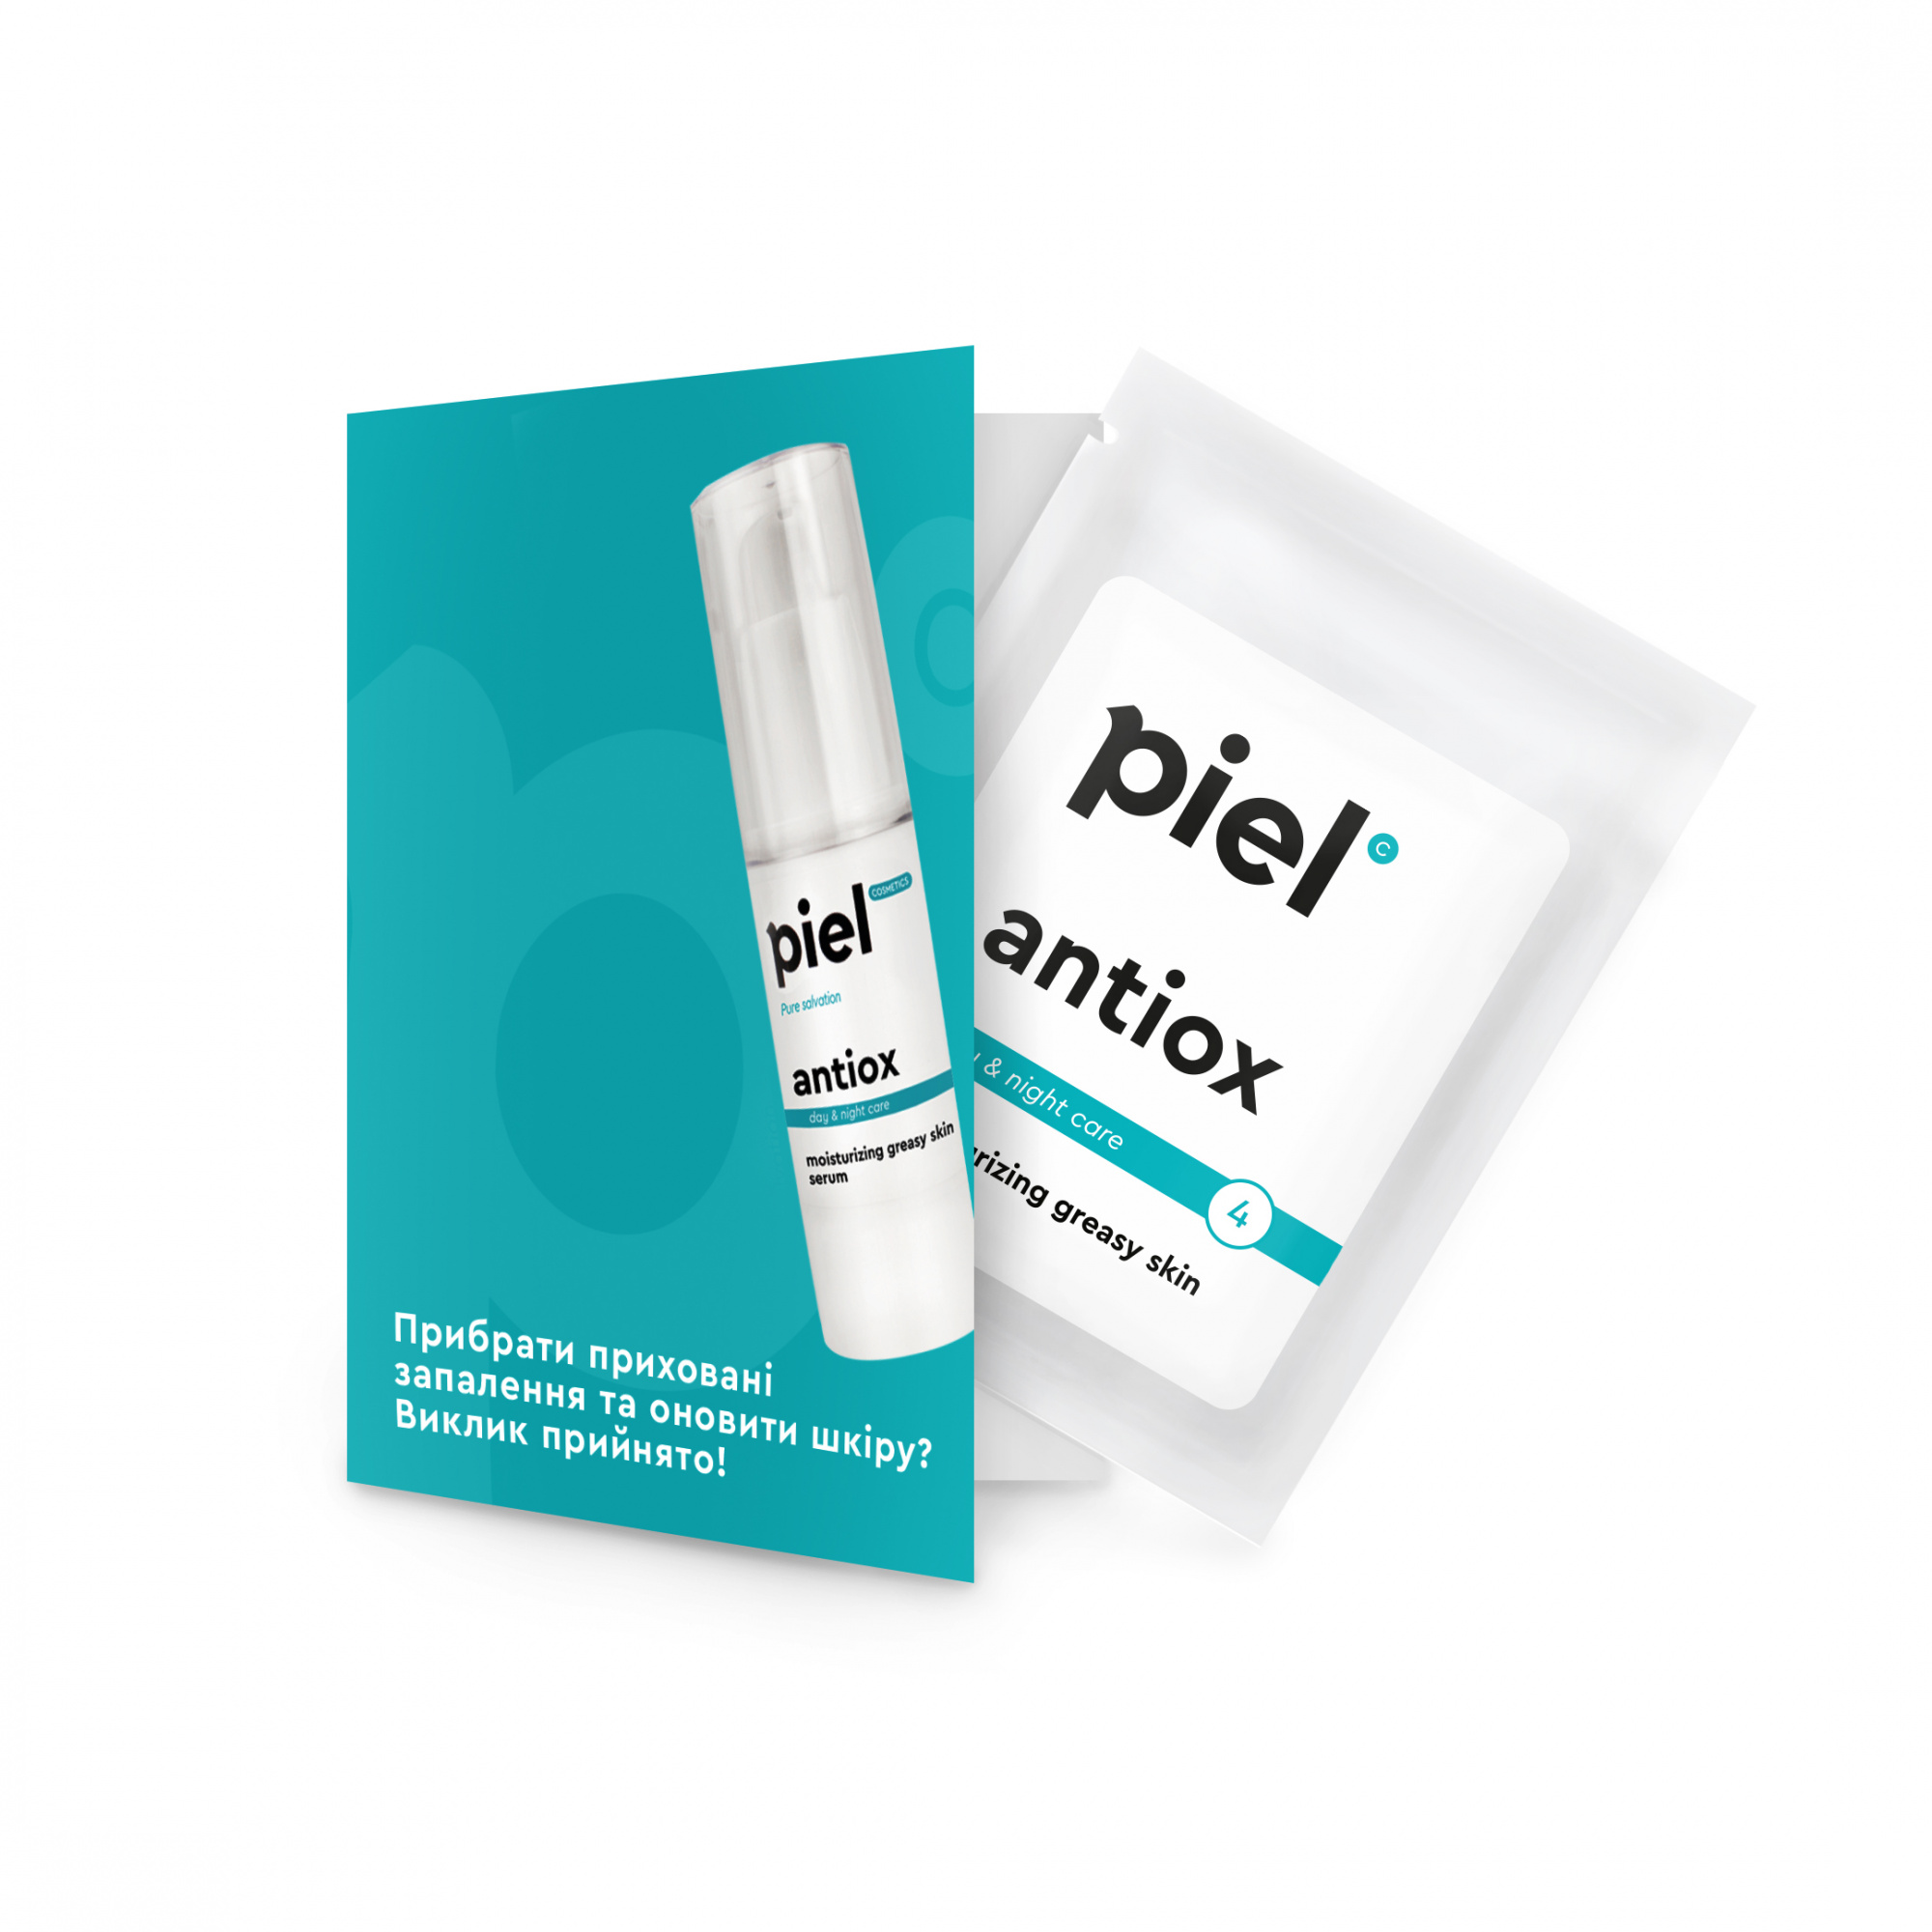 Antiox Serum Antioxidant serum with the placenta extract and vitamins C and E mini